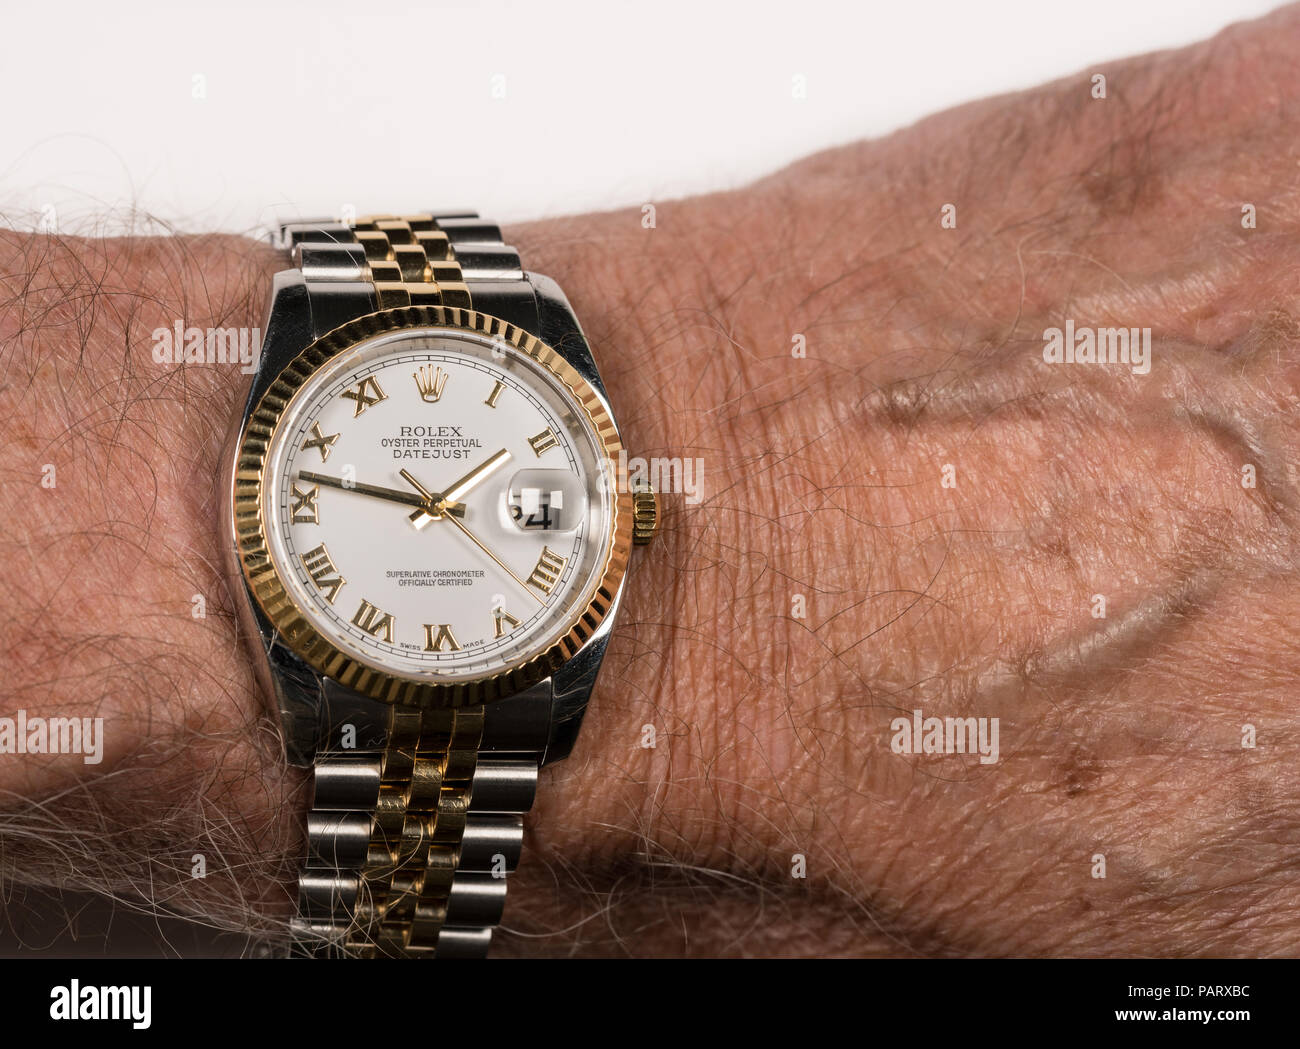 Rolex Oyster Datejust mens watch on old male wrist Stock Photo